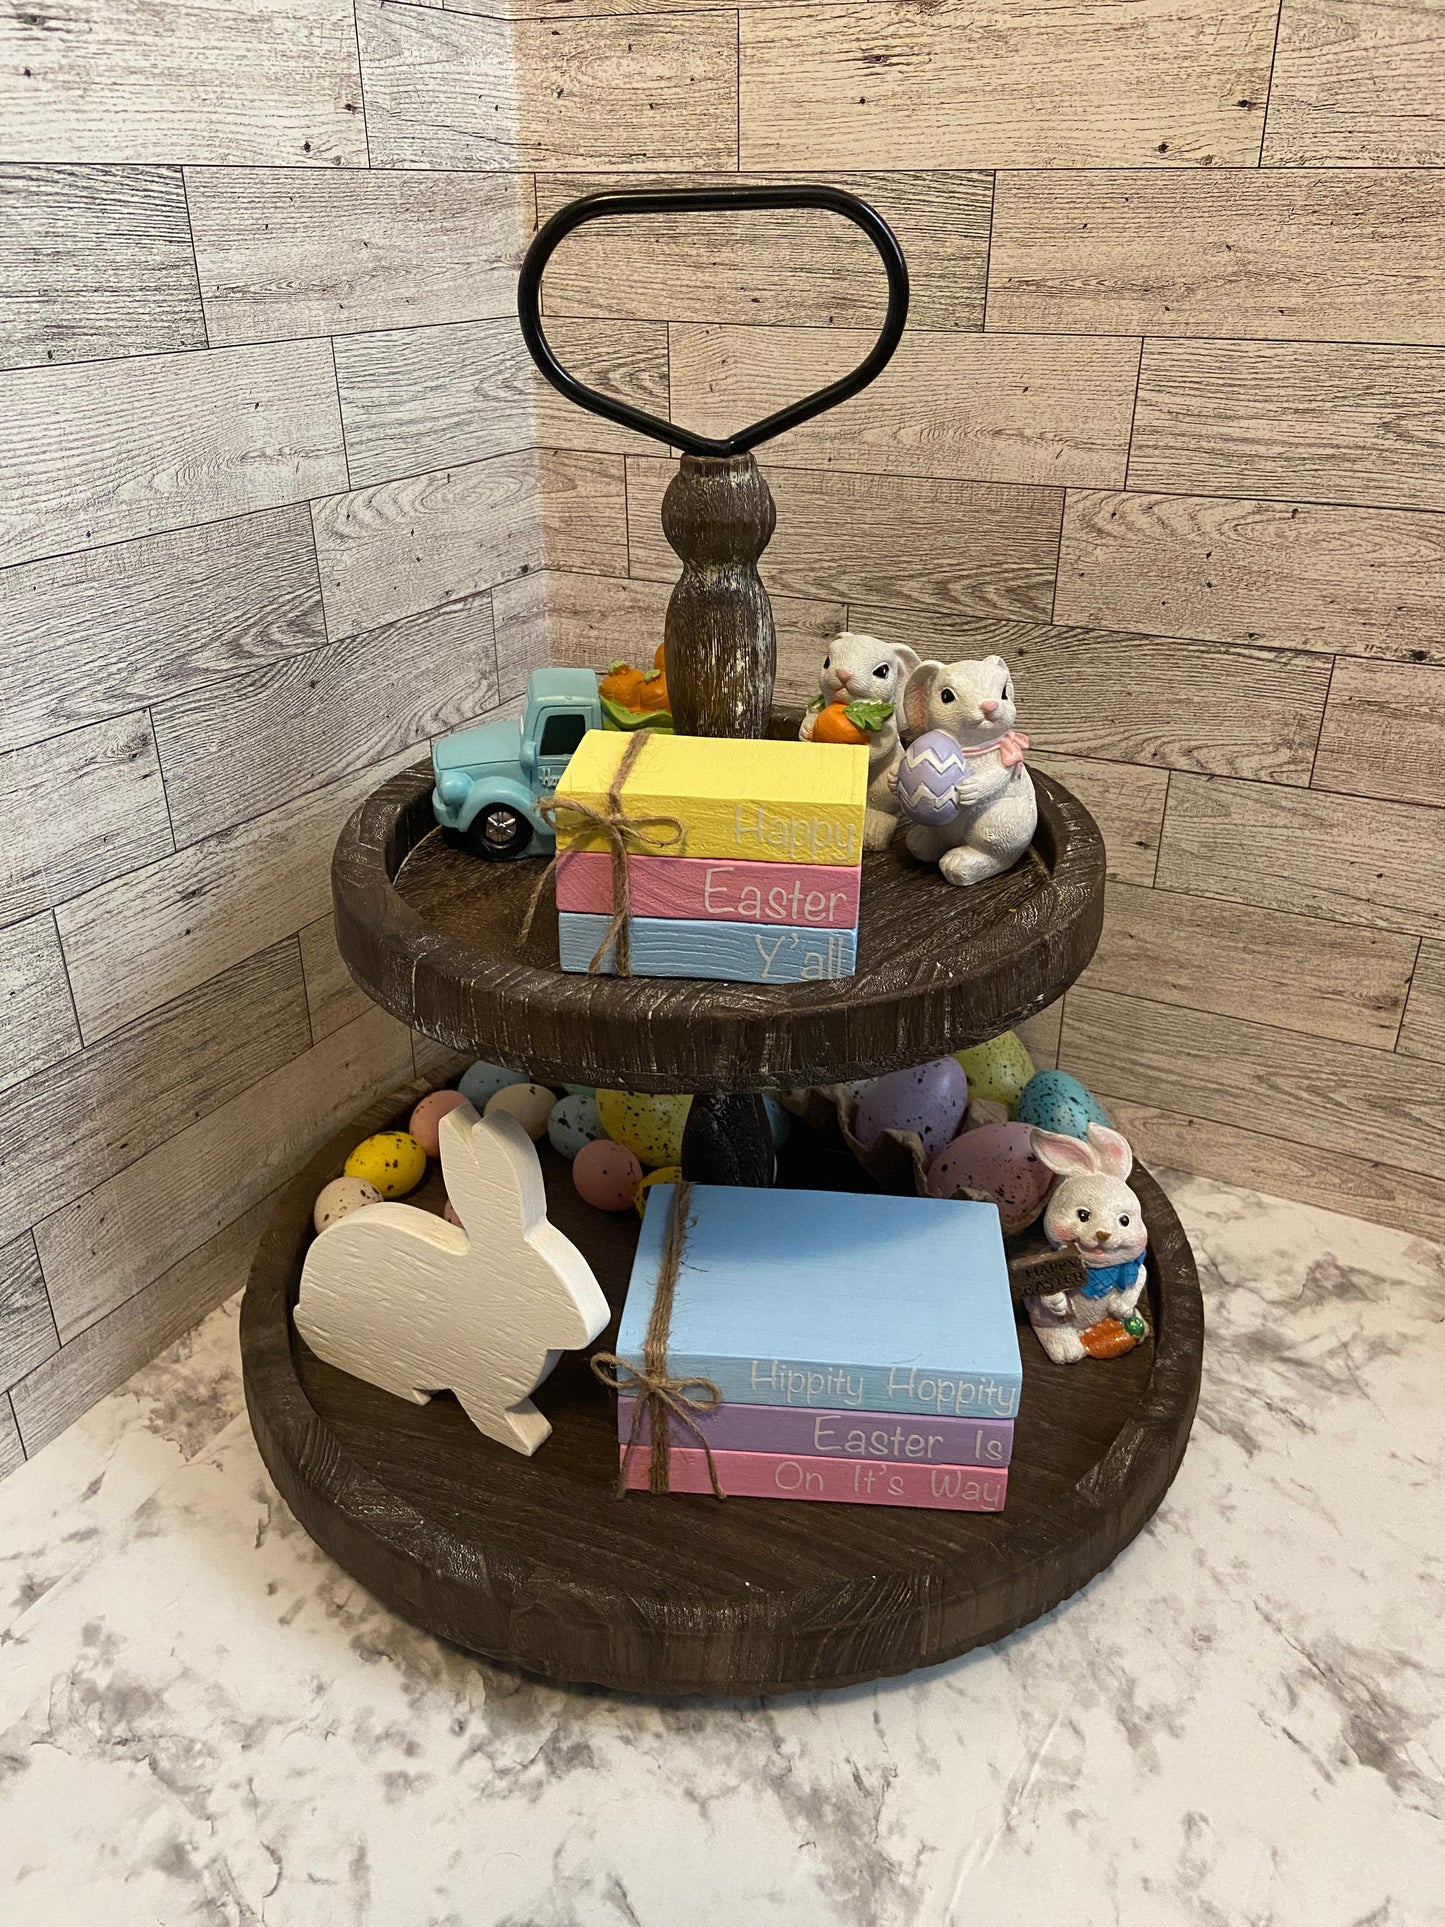 Happy Easter Y’all - Small Book Stack